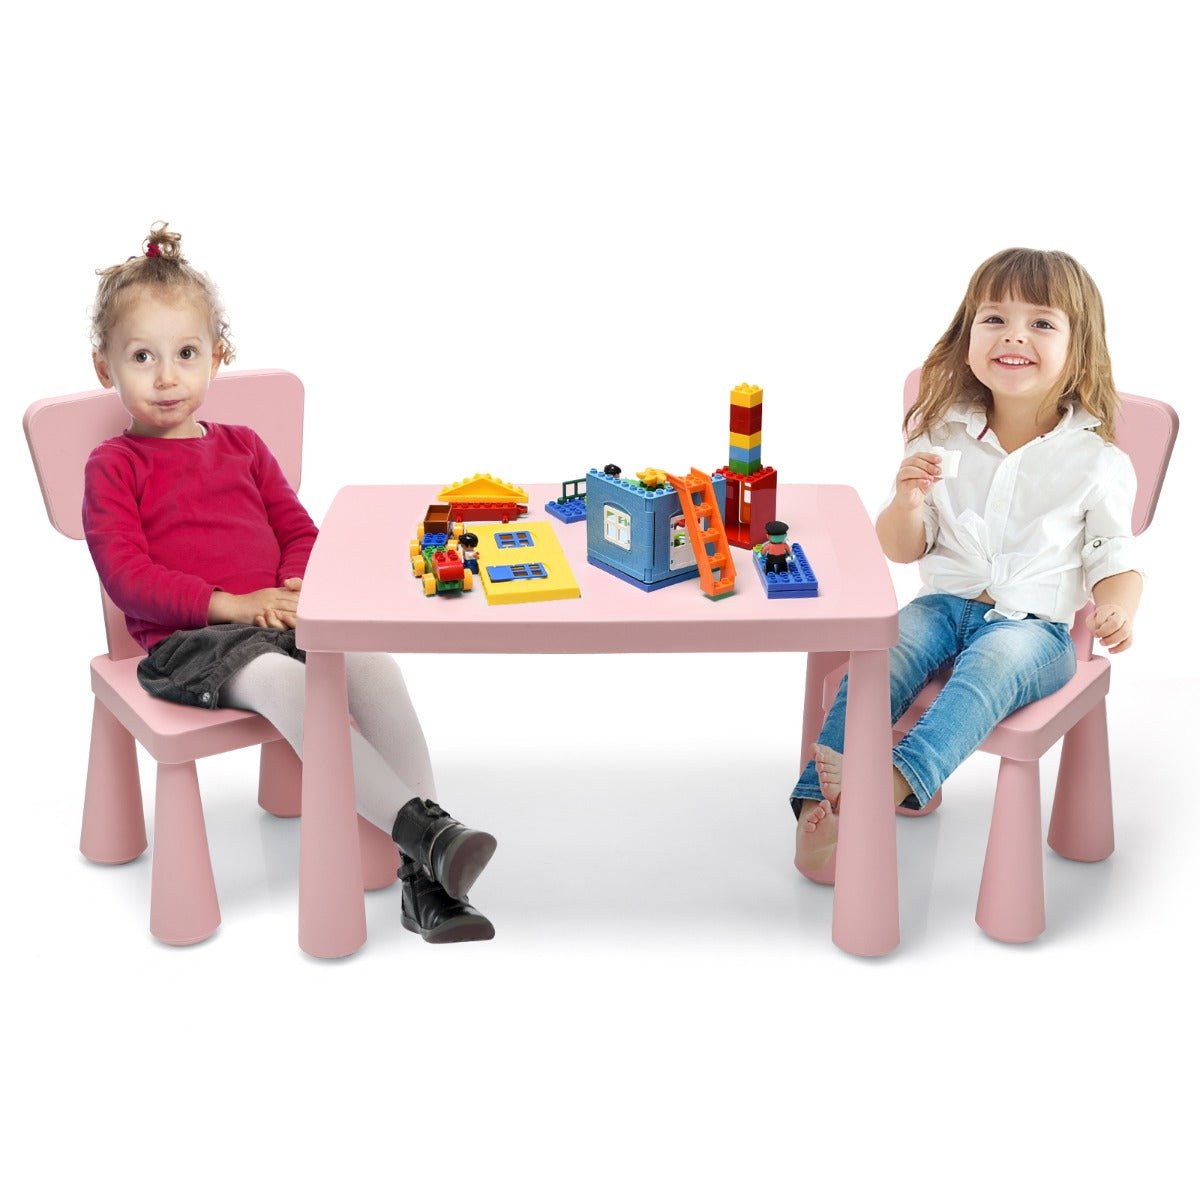 3-Piece Kids Table and Chairs Set - Cozy Pink Reading Corner